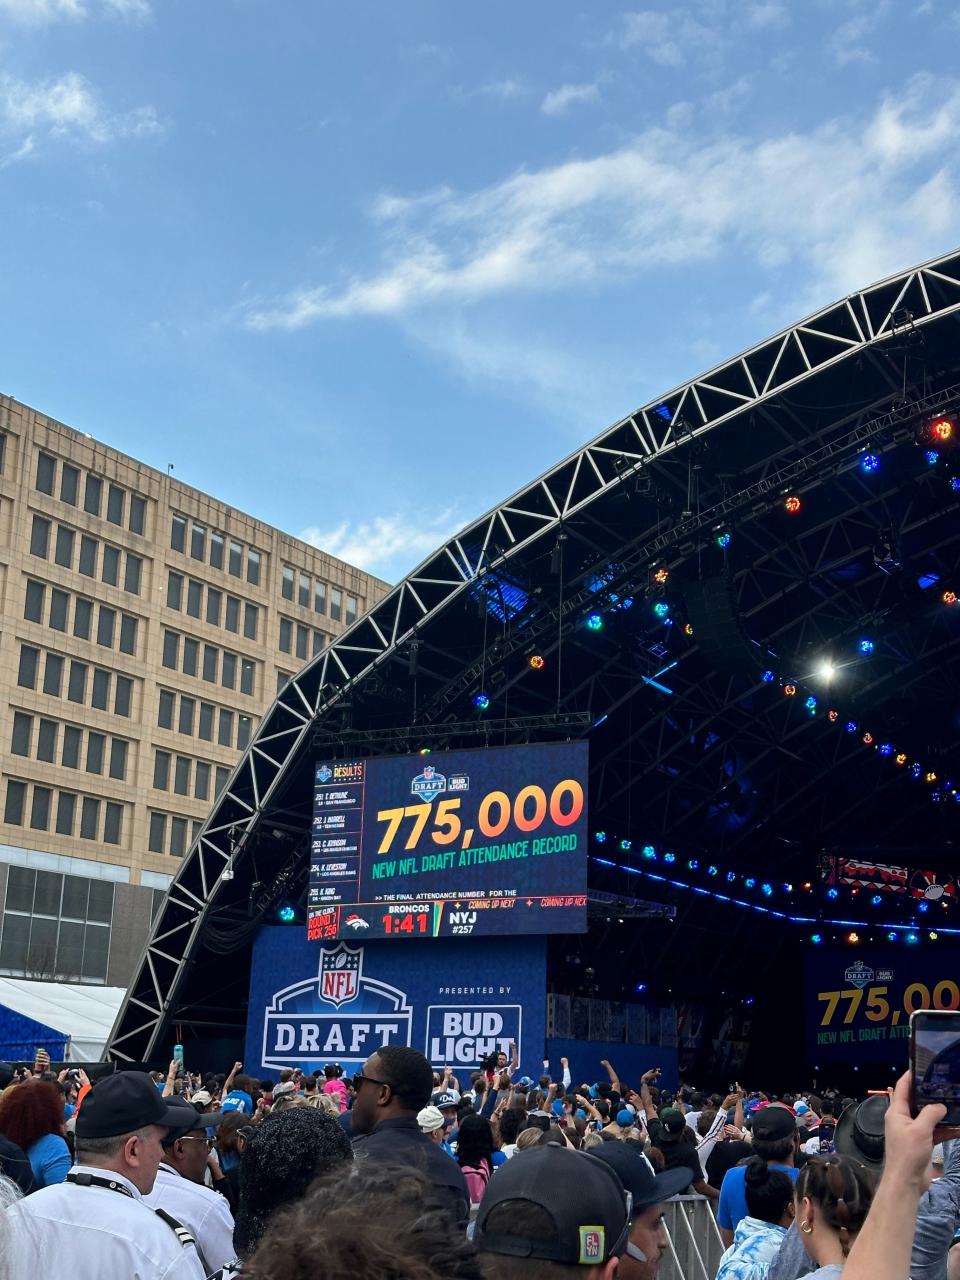 Detroit set a final attendance tally of 775,000 for the 2024 NFL draft, a record and another reason for the crowd to celebrate Saturday night.